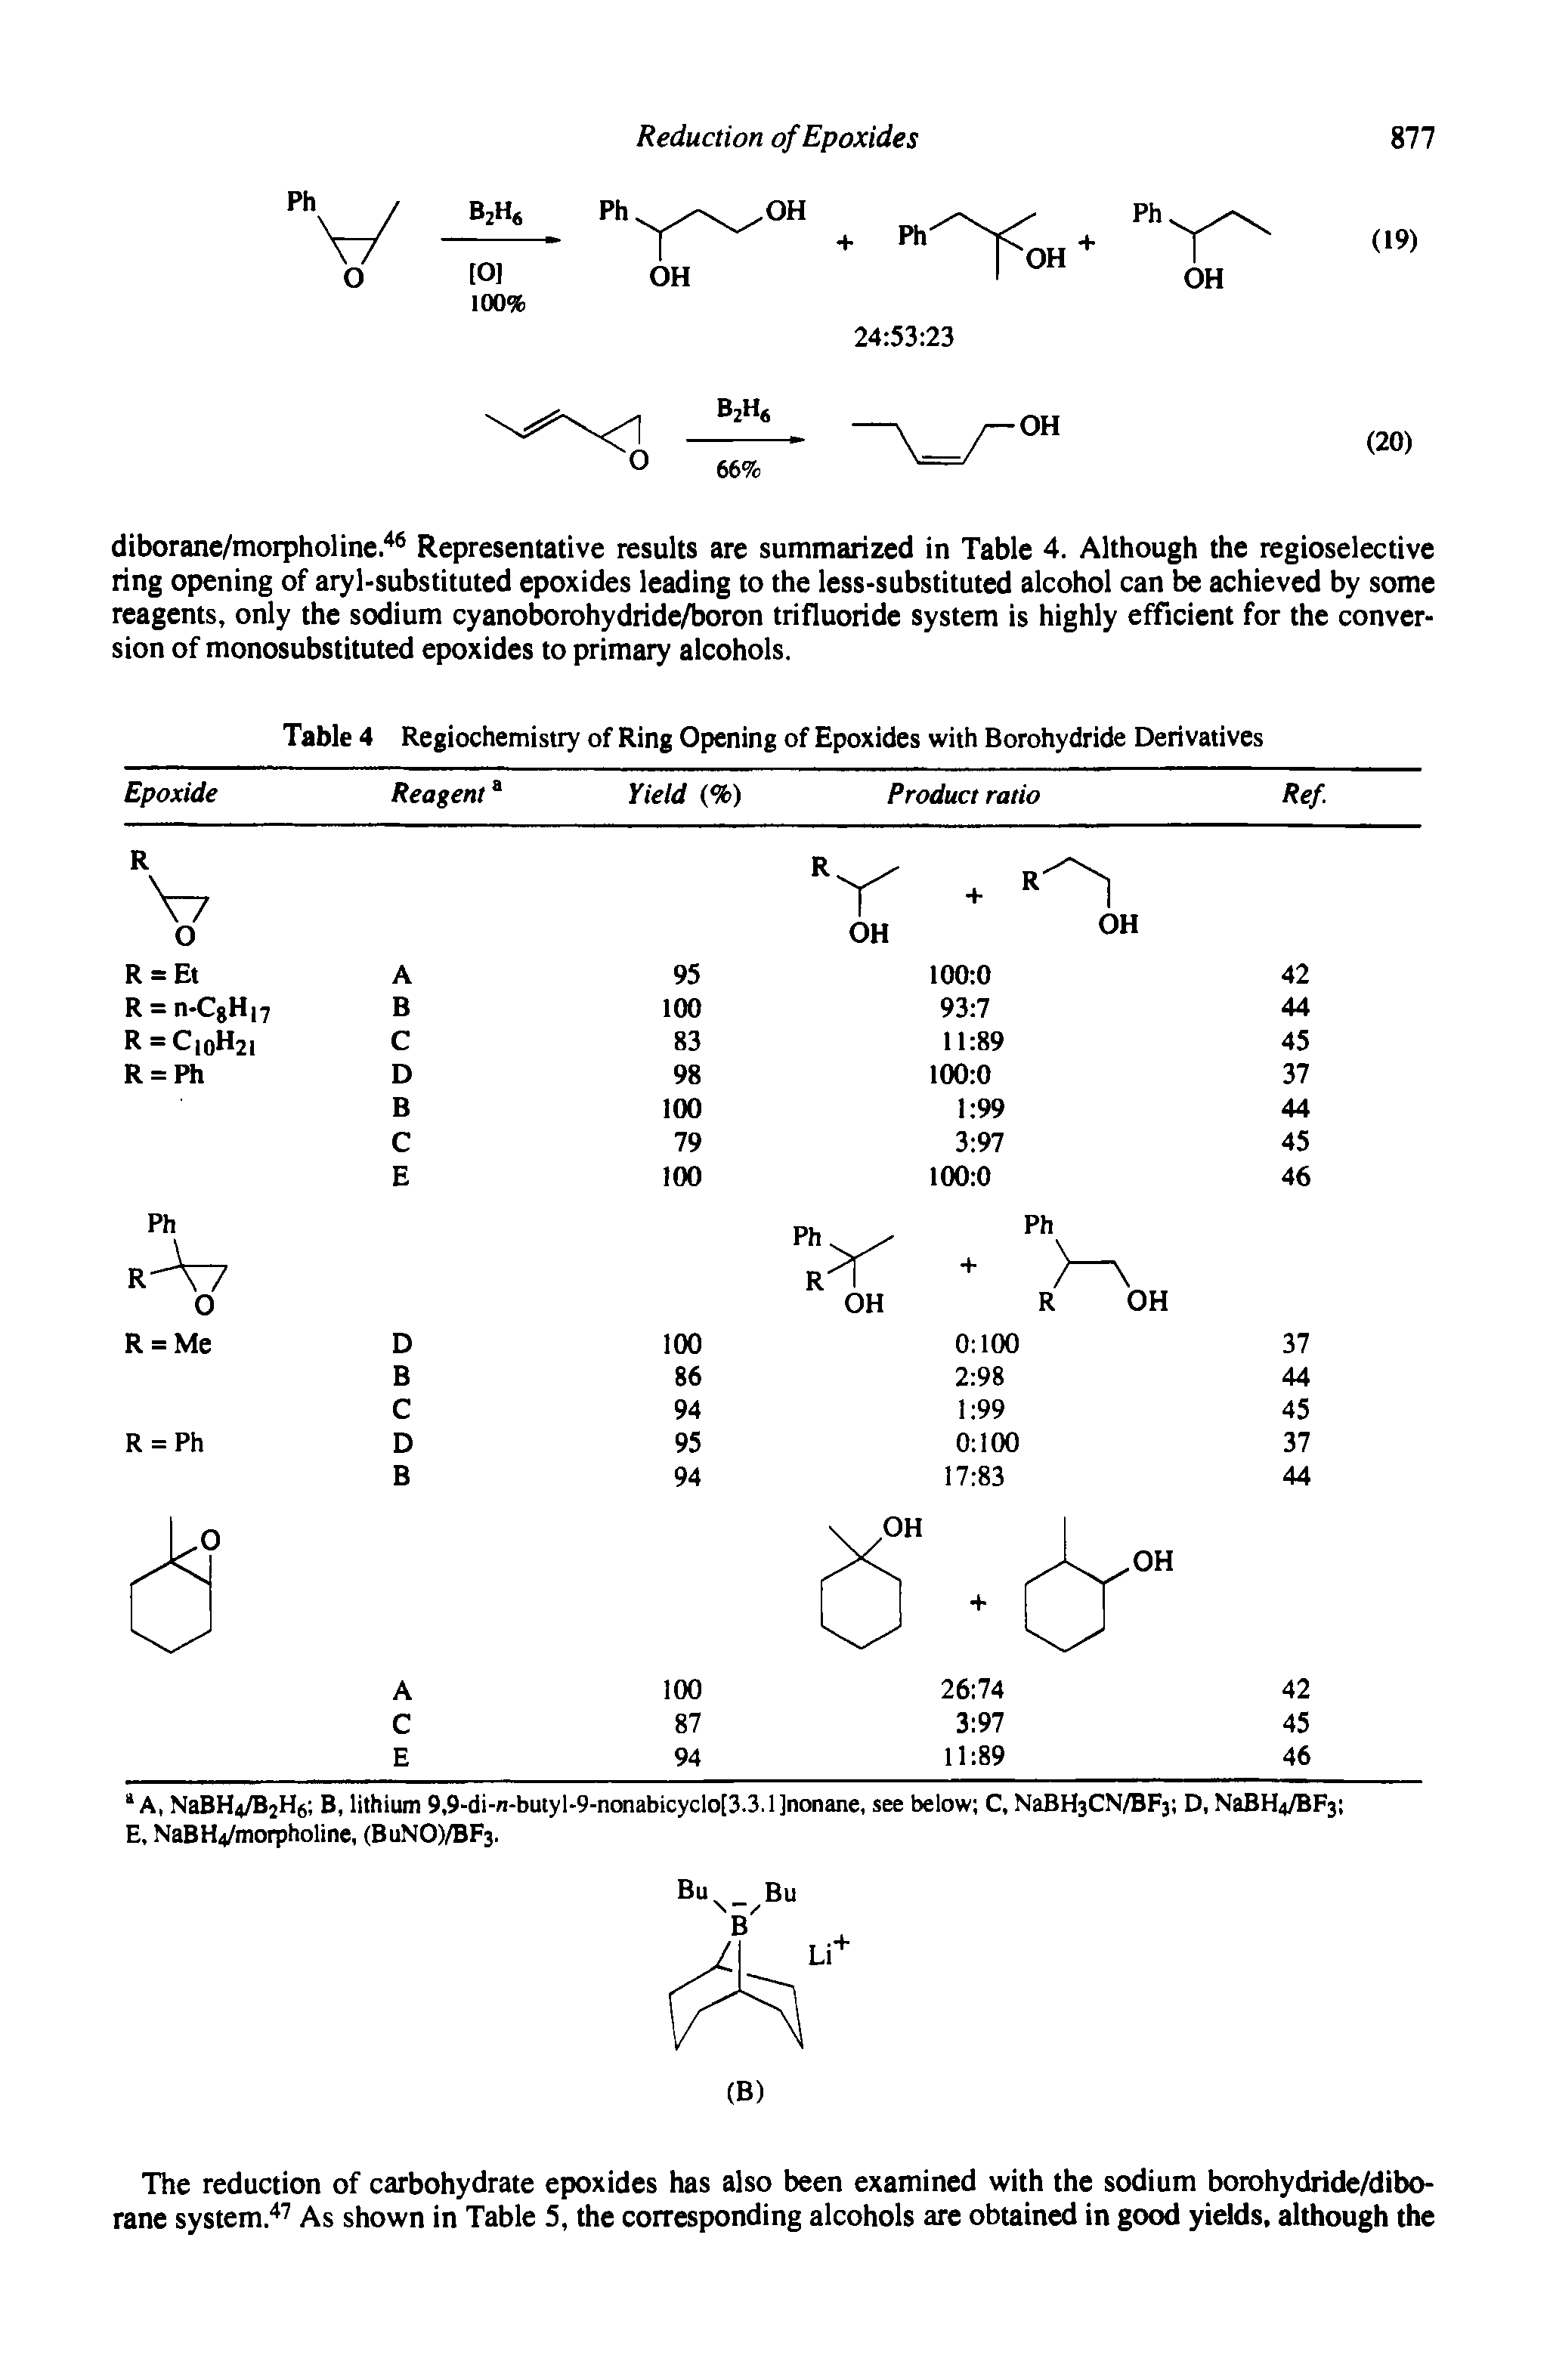 Table 4 Regiochemistry of Ring Opening of Epoxides with Borohydride Derivatives...